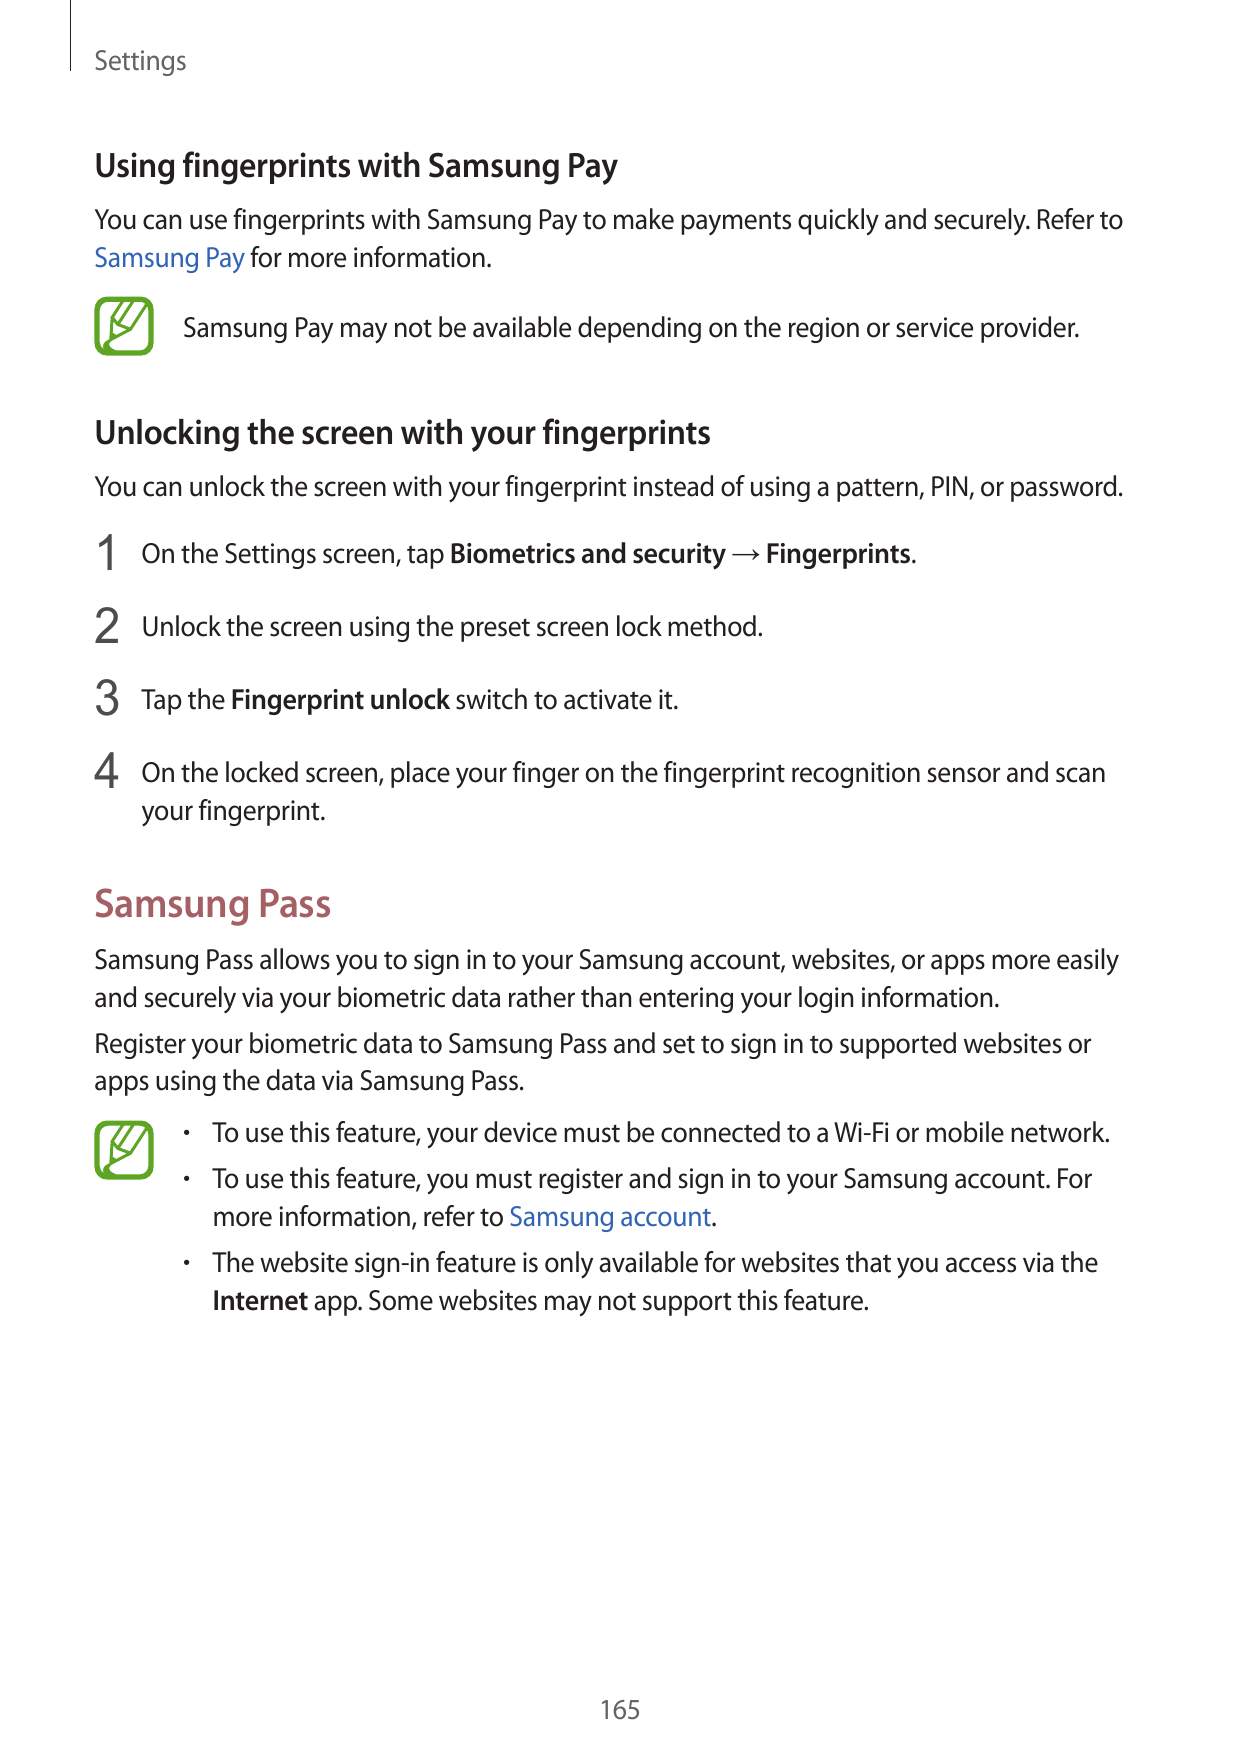 SettingsUsing fingerprints with Samsung PayYou can use fingerprints with Samsung Pay to make payments quickly and securely. Refe